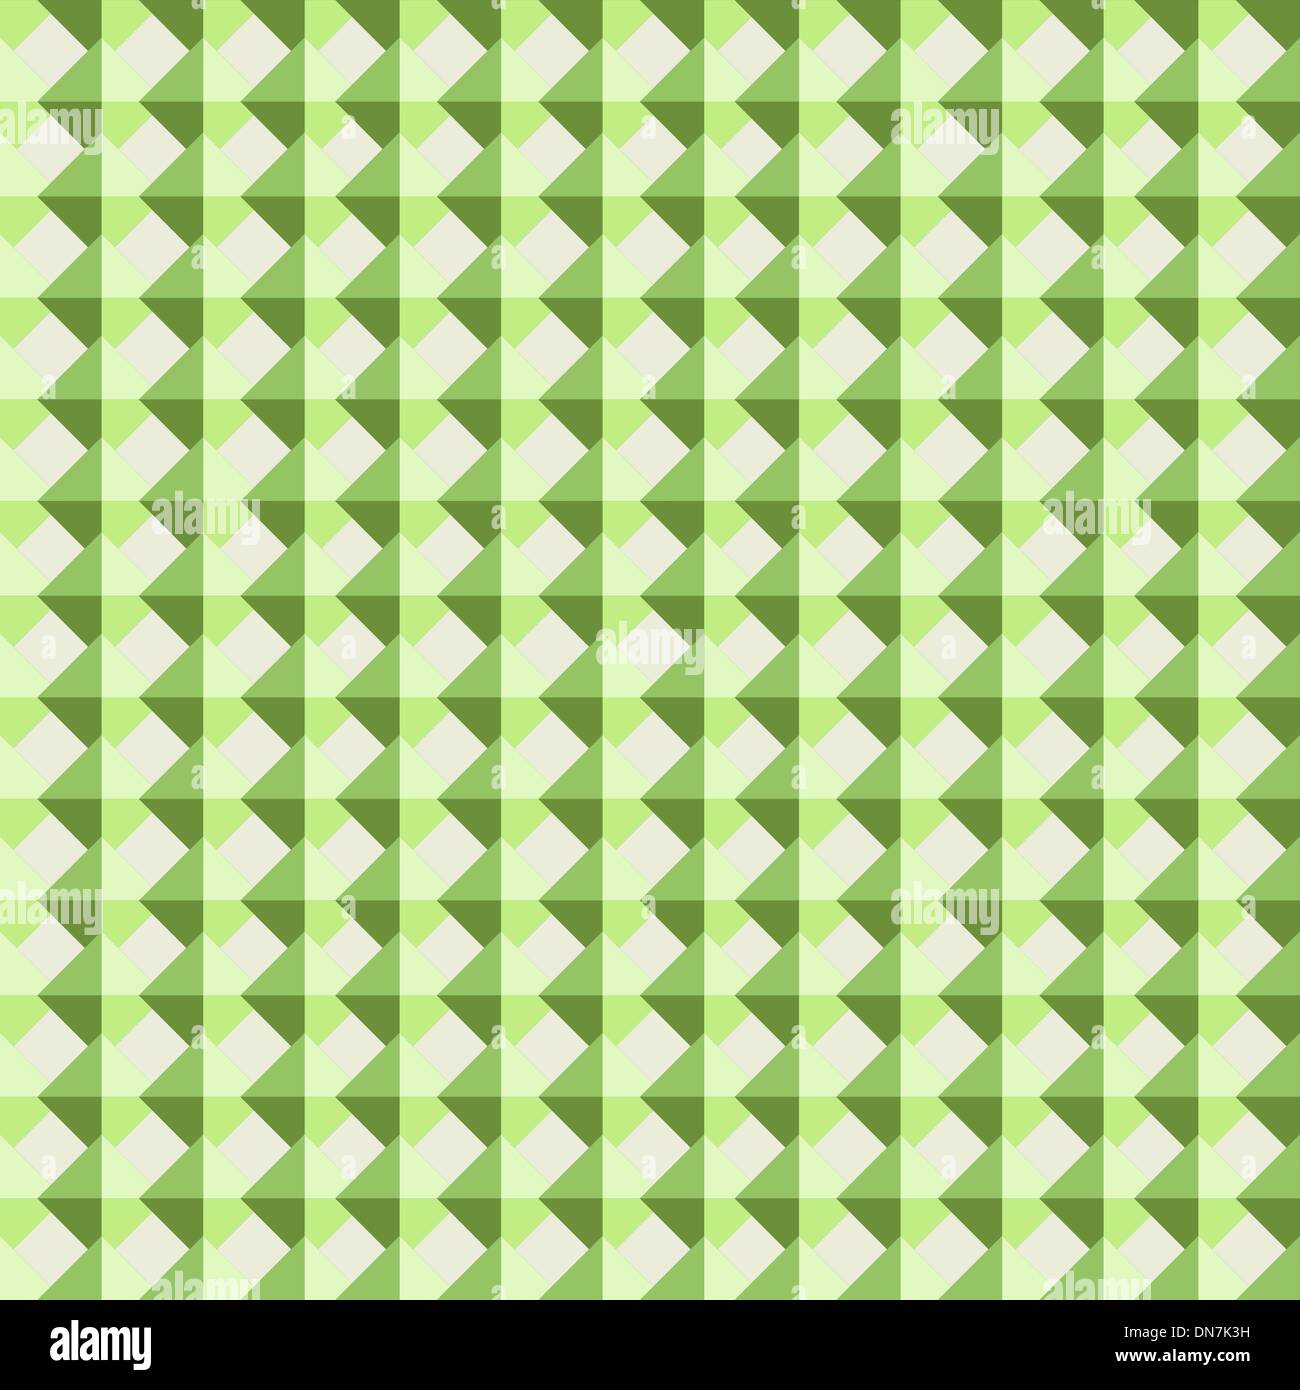 Abstract Green Seamless Geometric Vector Pattern Stock Vector